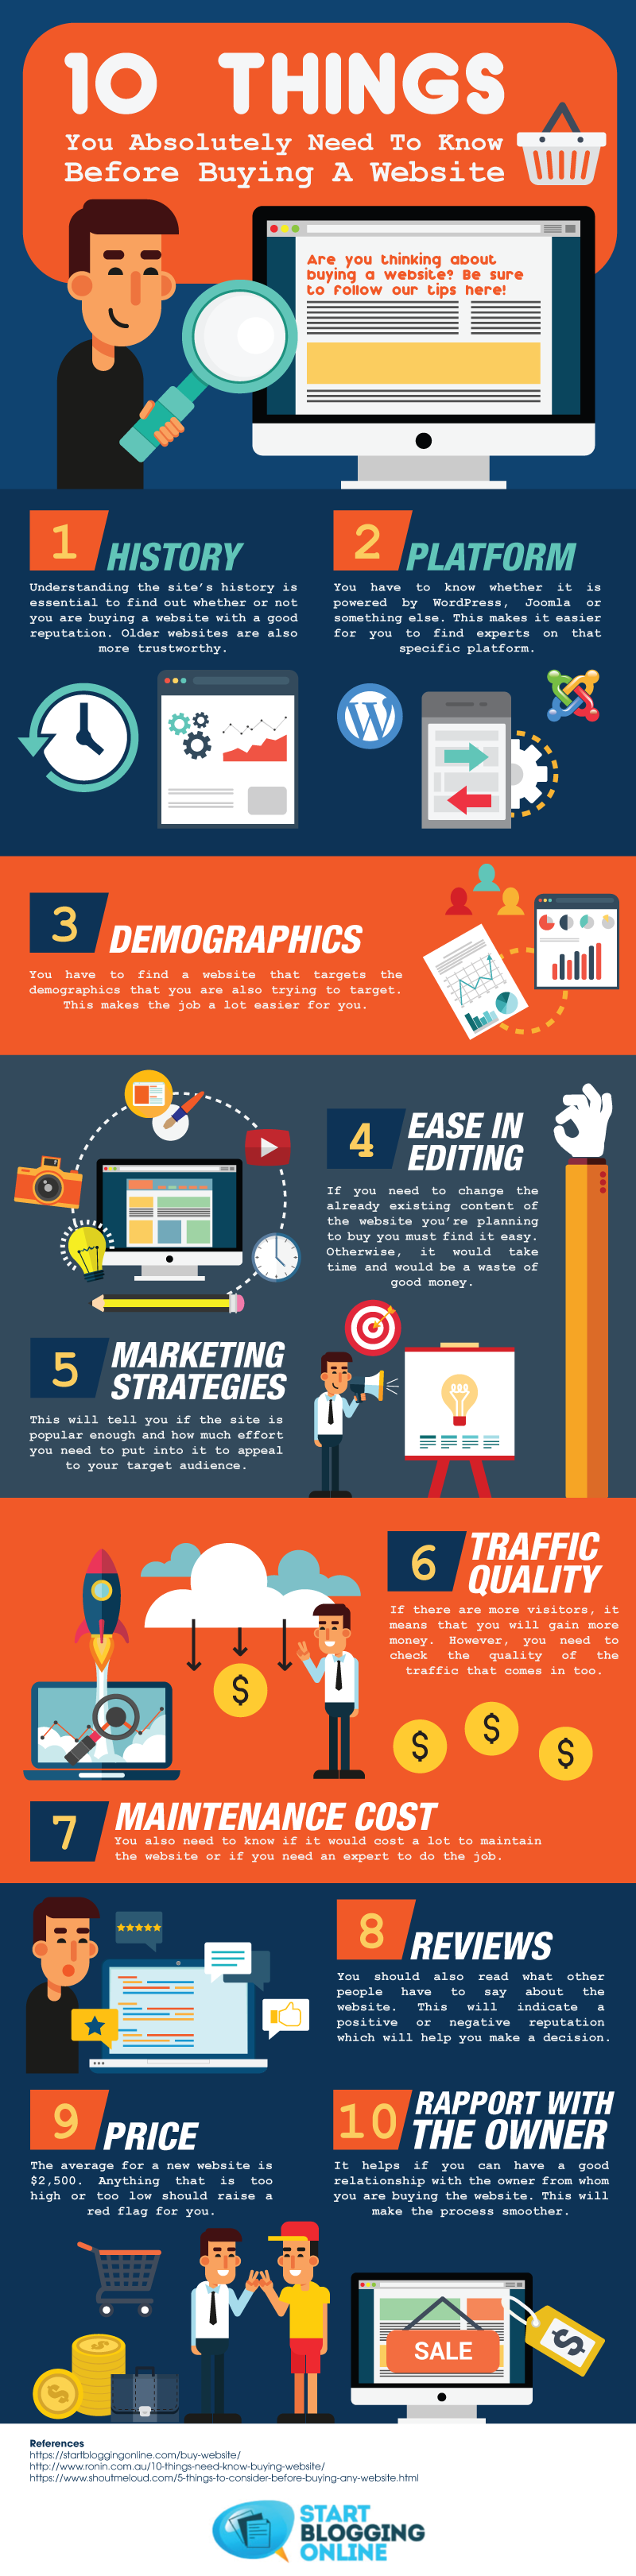 10 Things You Absolutely Need To Know About Buying A Website infographic